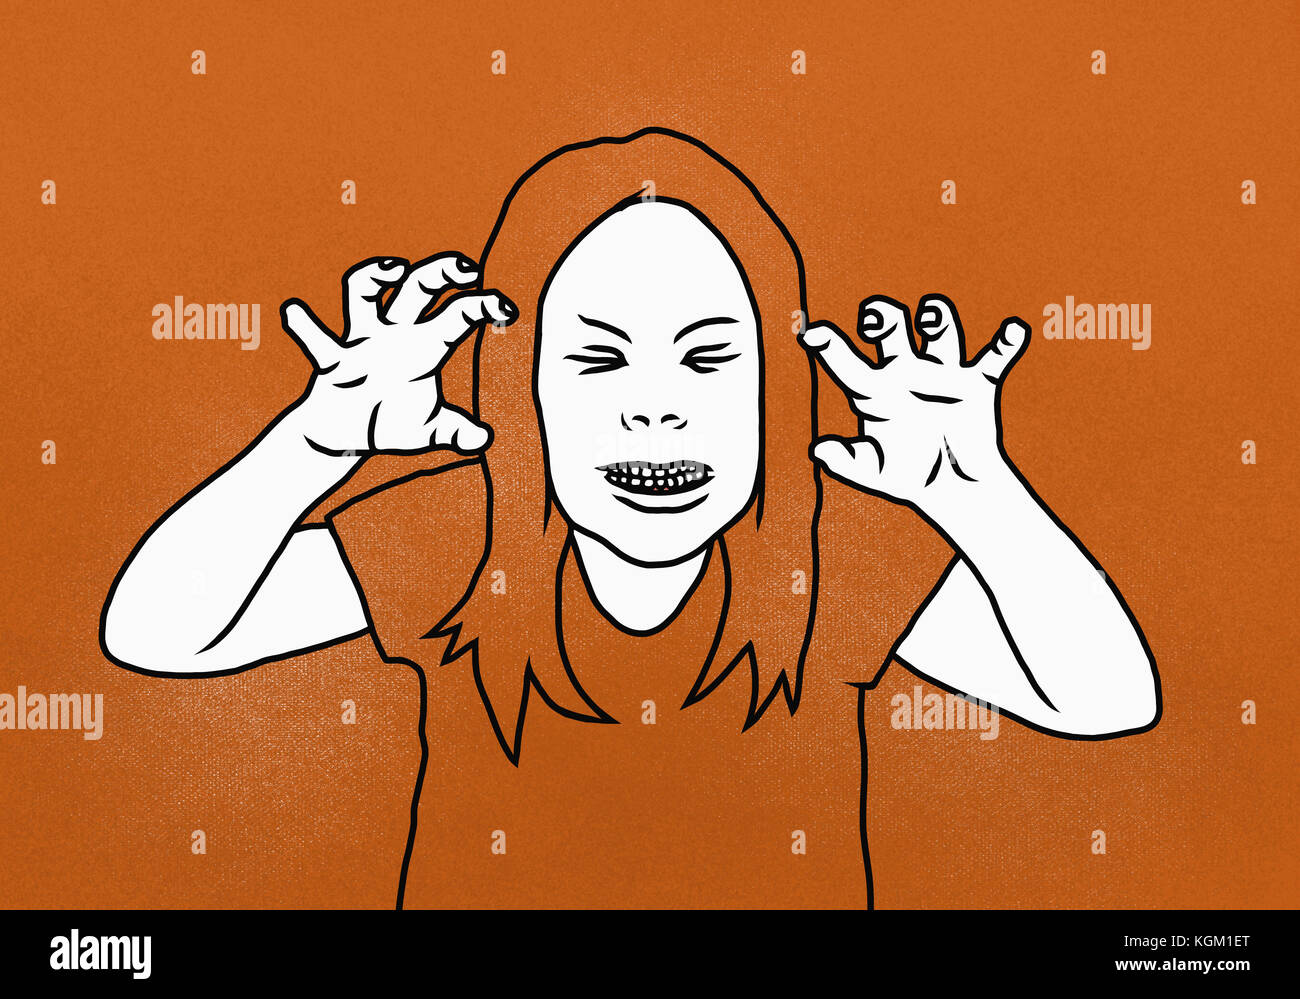 Illustration of woman clenching teeth while gesturing against orange background Stock Photo